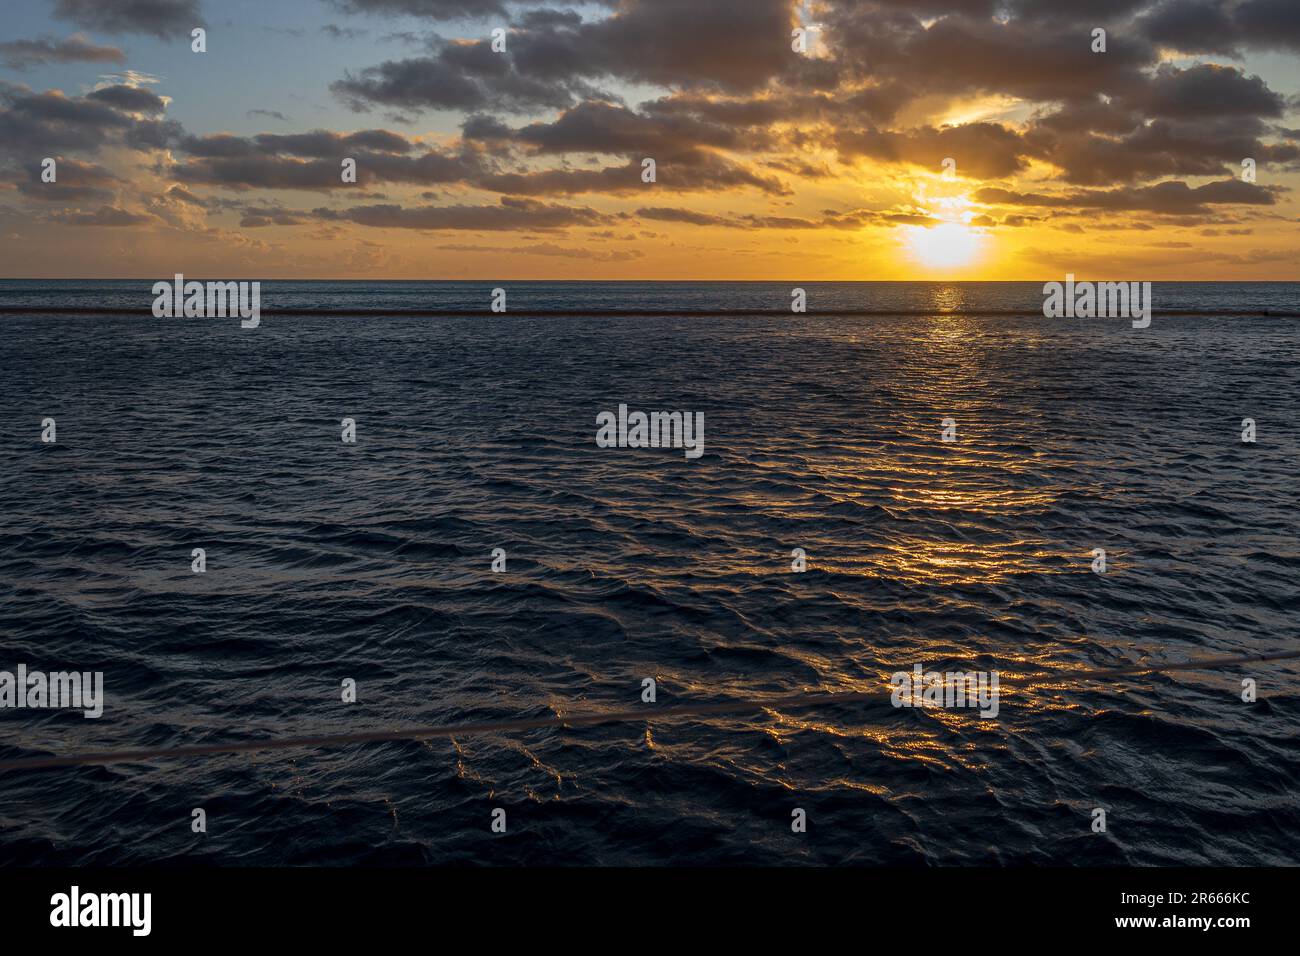 Photo of a Sunset over the Pacific, taken from a Catamaran deck. Stock Photo